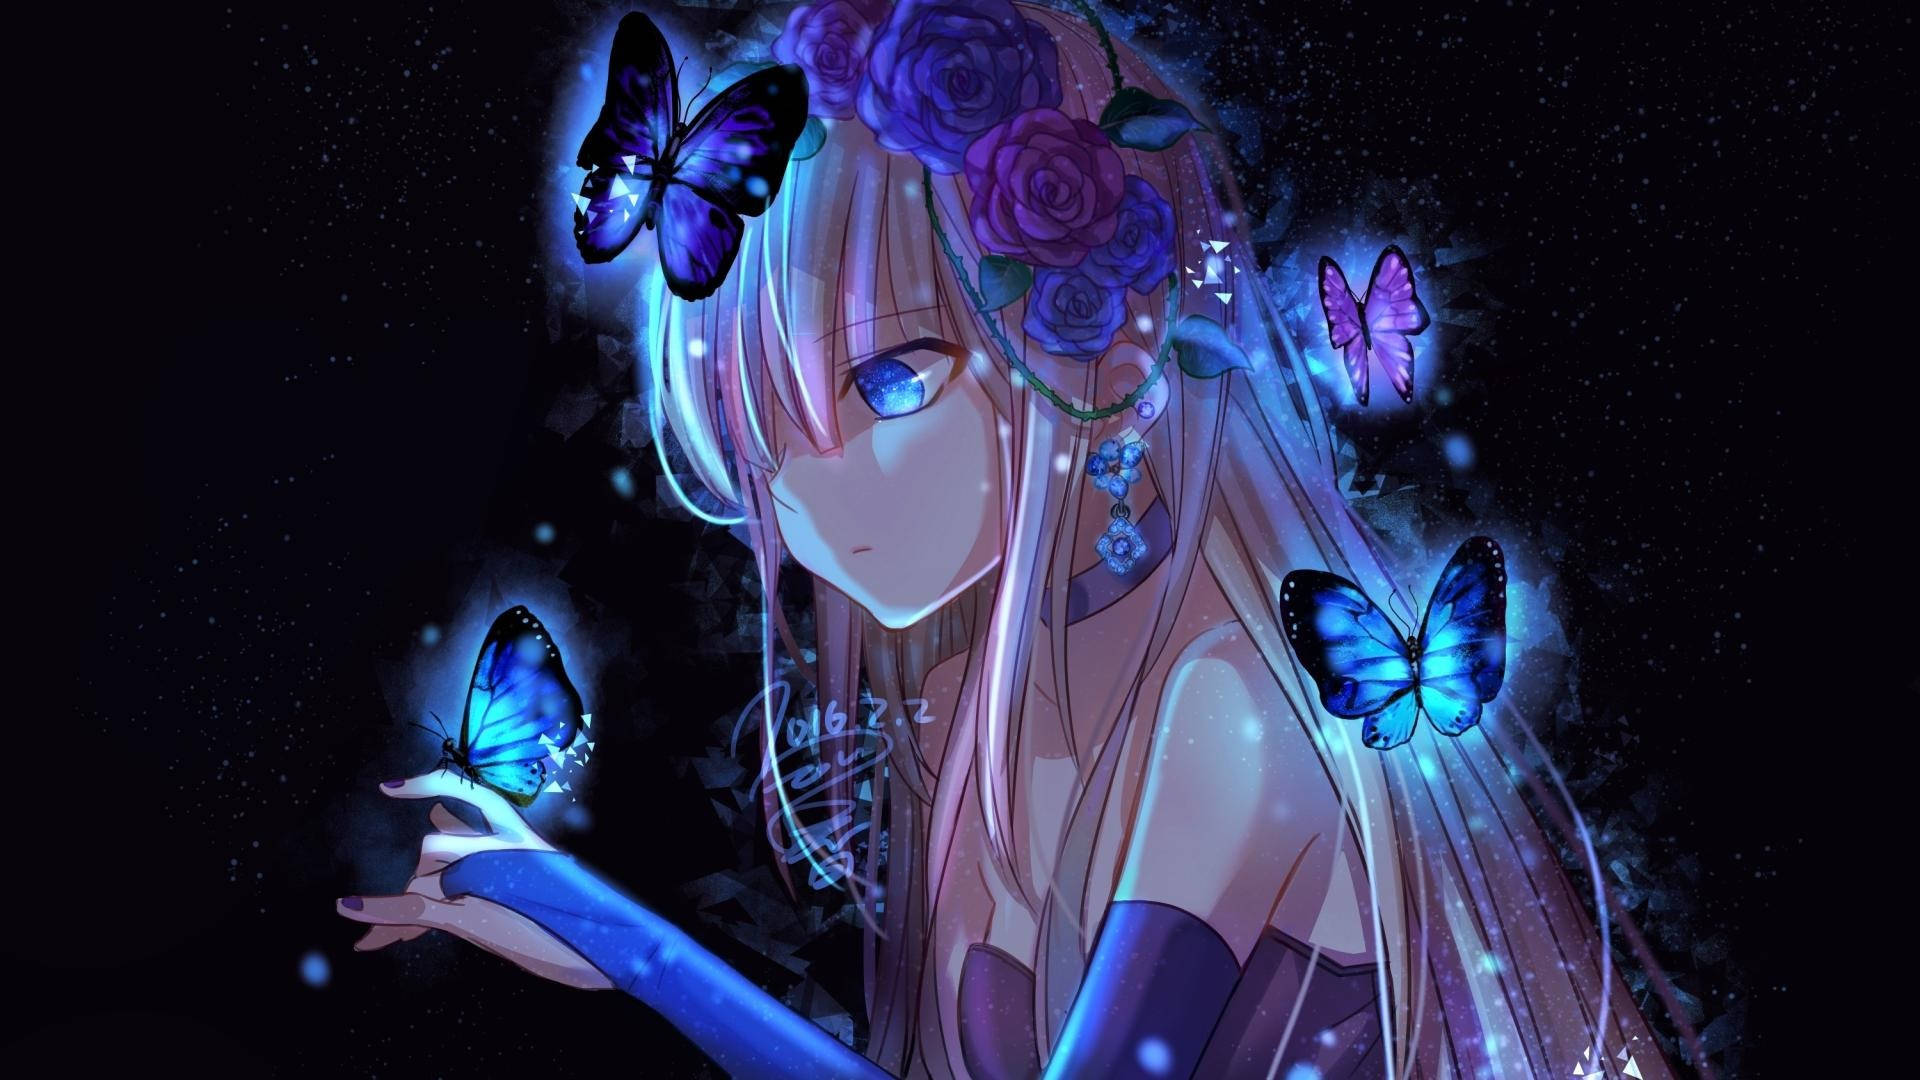 Download Cool Anime Girl With Butterflies Wallpaper 